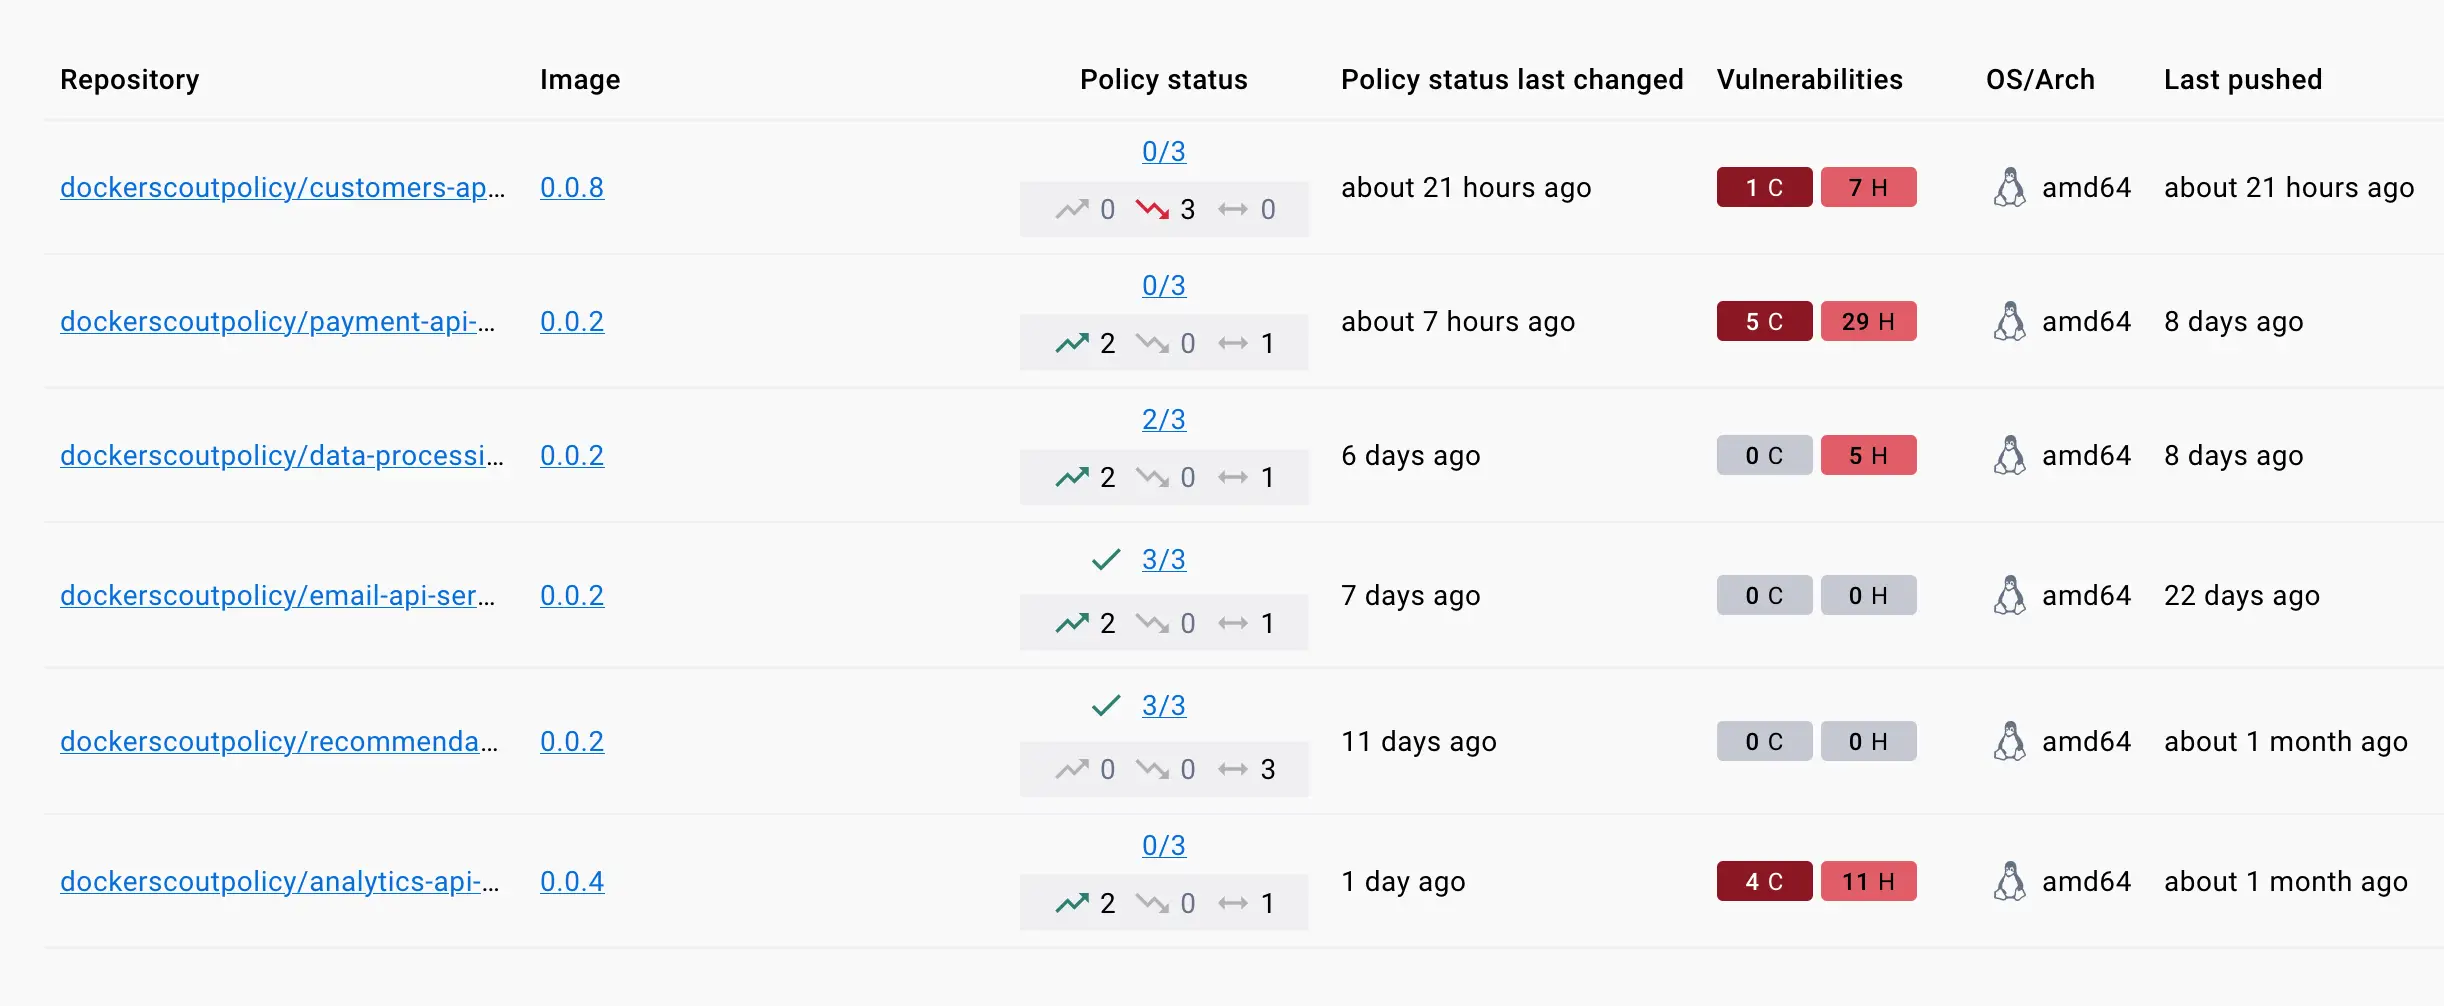 Policy status in the image list